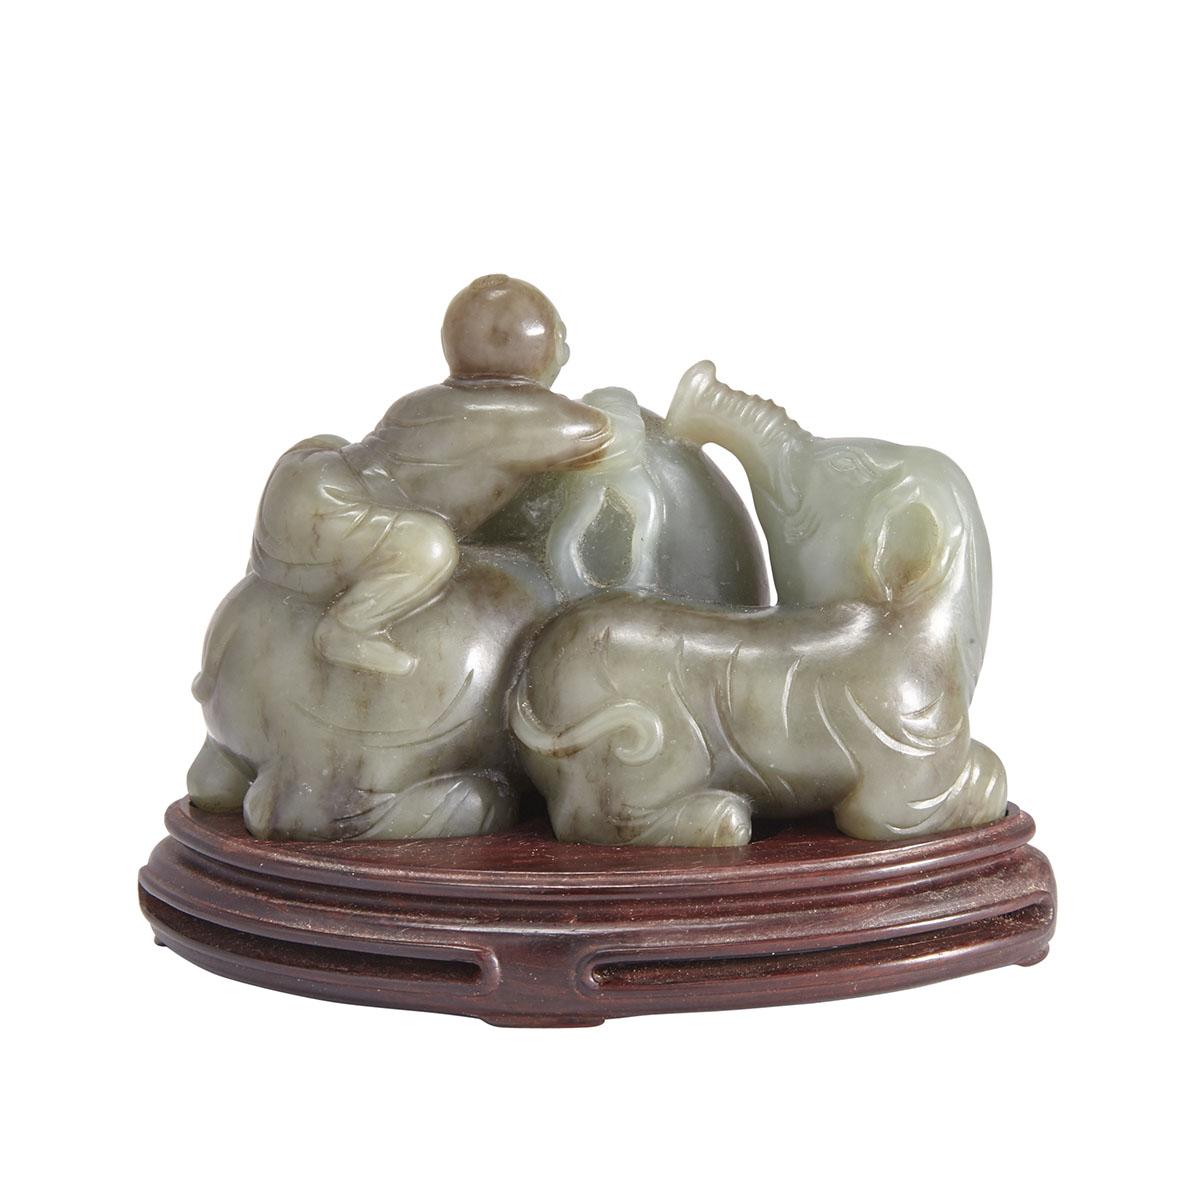 A JADE CARVING OF BOY AND ELEPHANTS WITH A ZITAN STAND, QING DYNASTY 清 童子洗象玉擺件 原配紫檀座 Of reseda green - Image 2 of 2